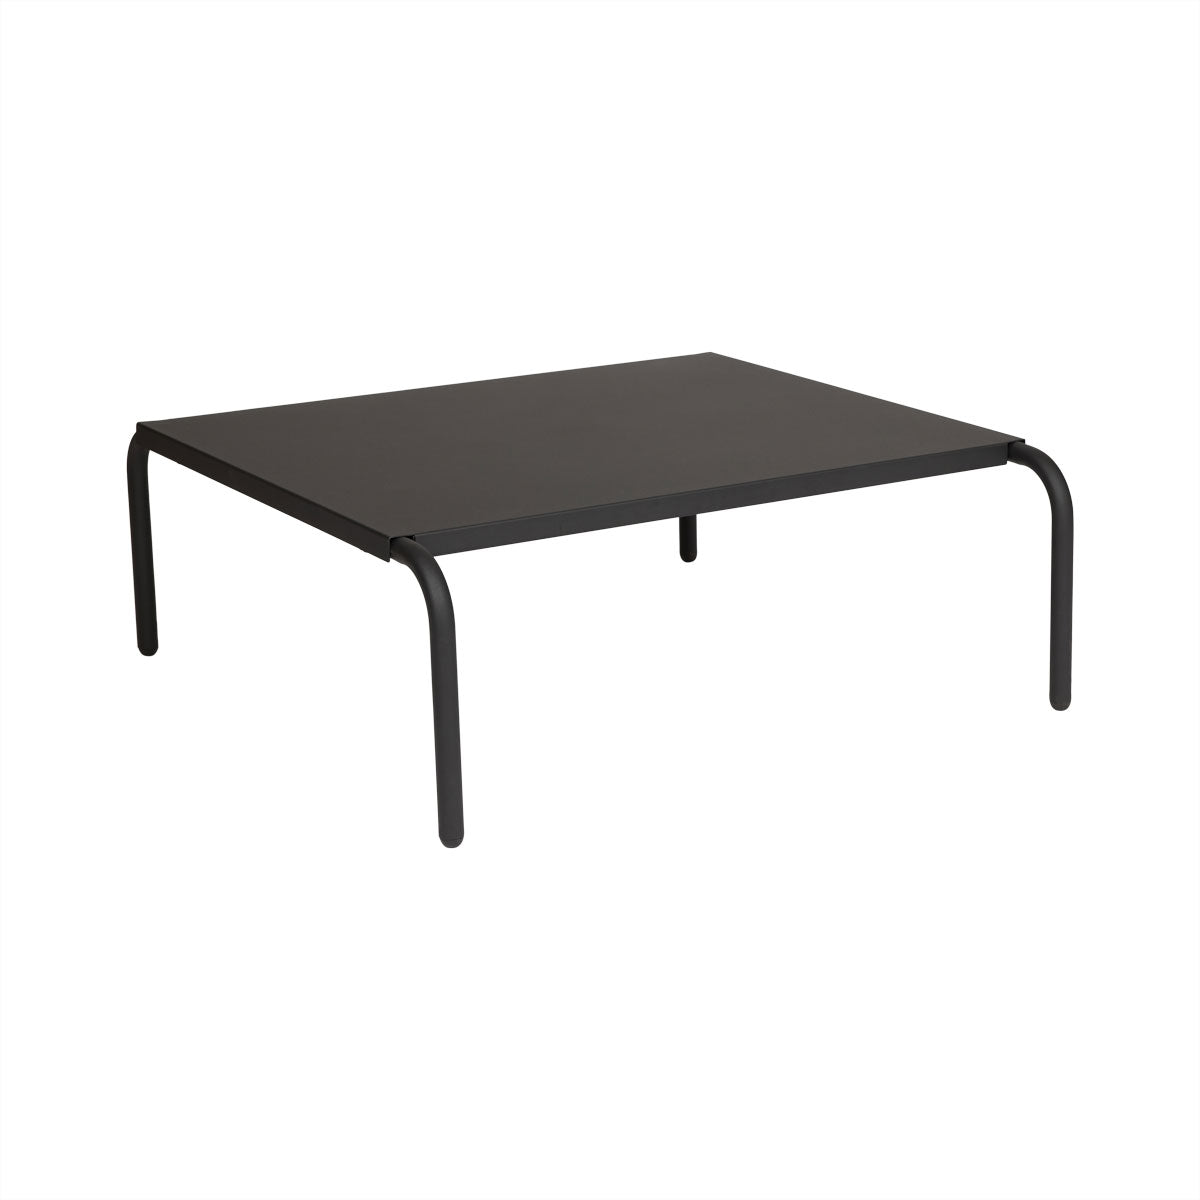 OYOY LIVING Furi Outdoor Lounge Table Table 206 Black